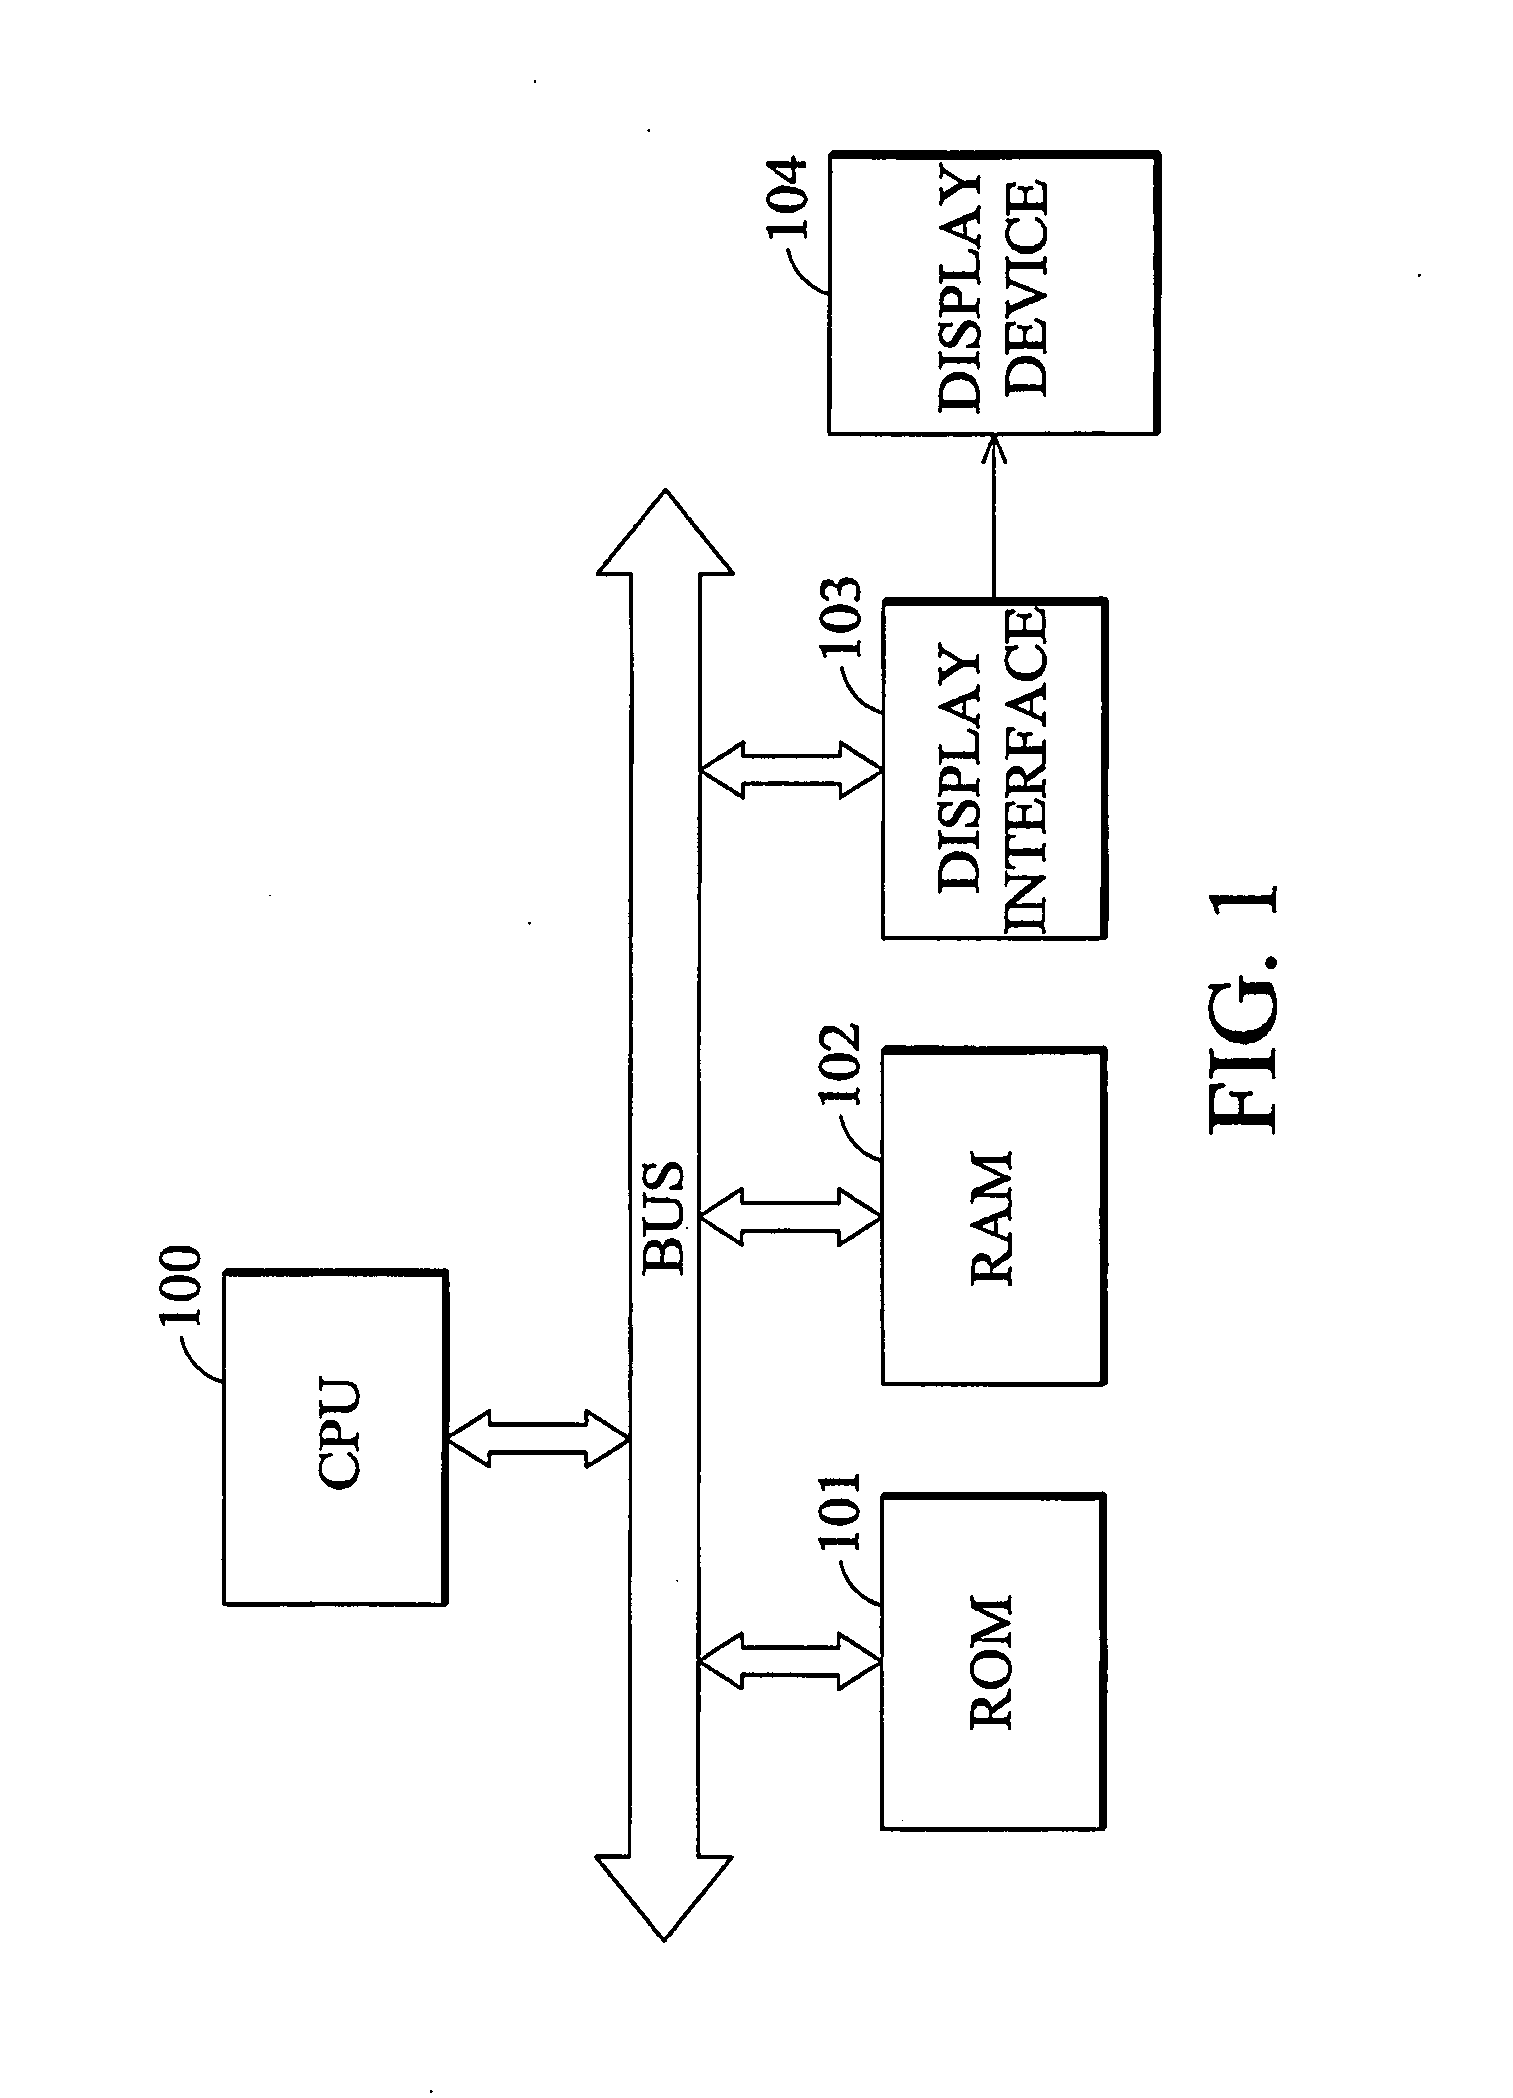 Method and apparatus for displaying an encoded image